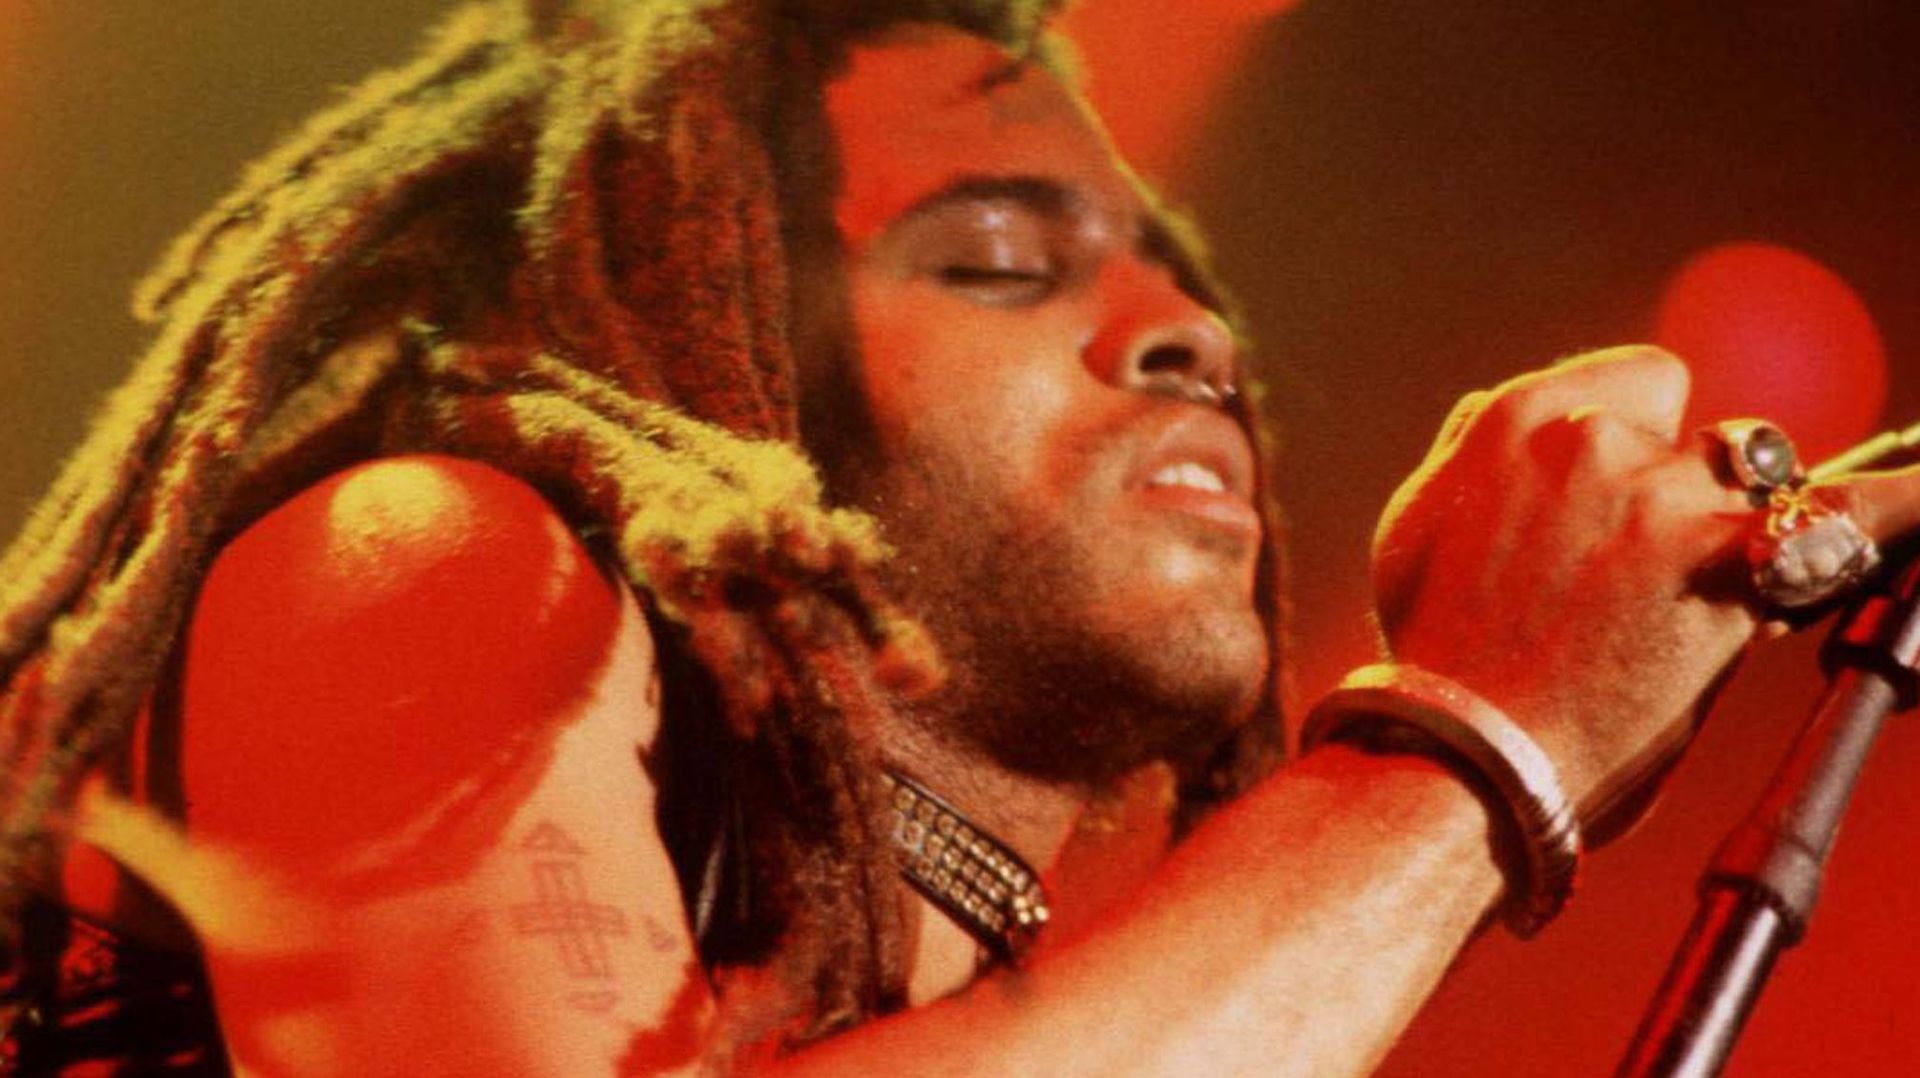 Lenny Kravitz in Concert at The Academy – 1993